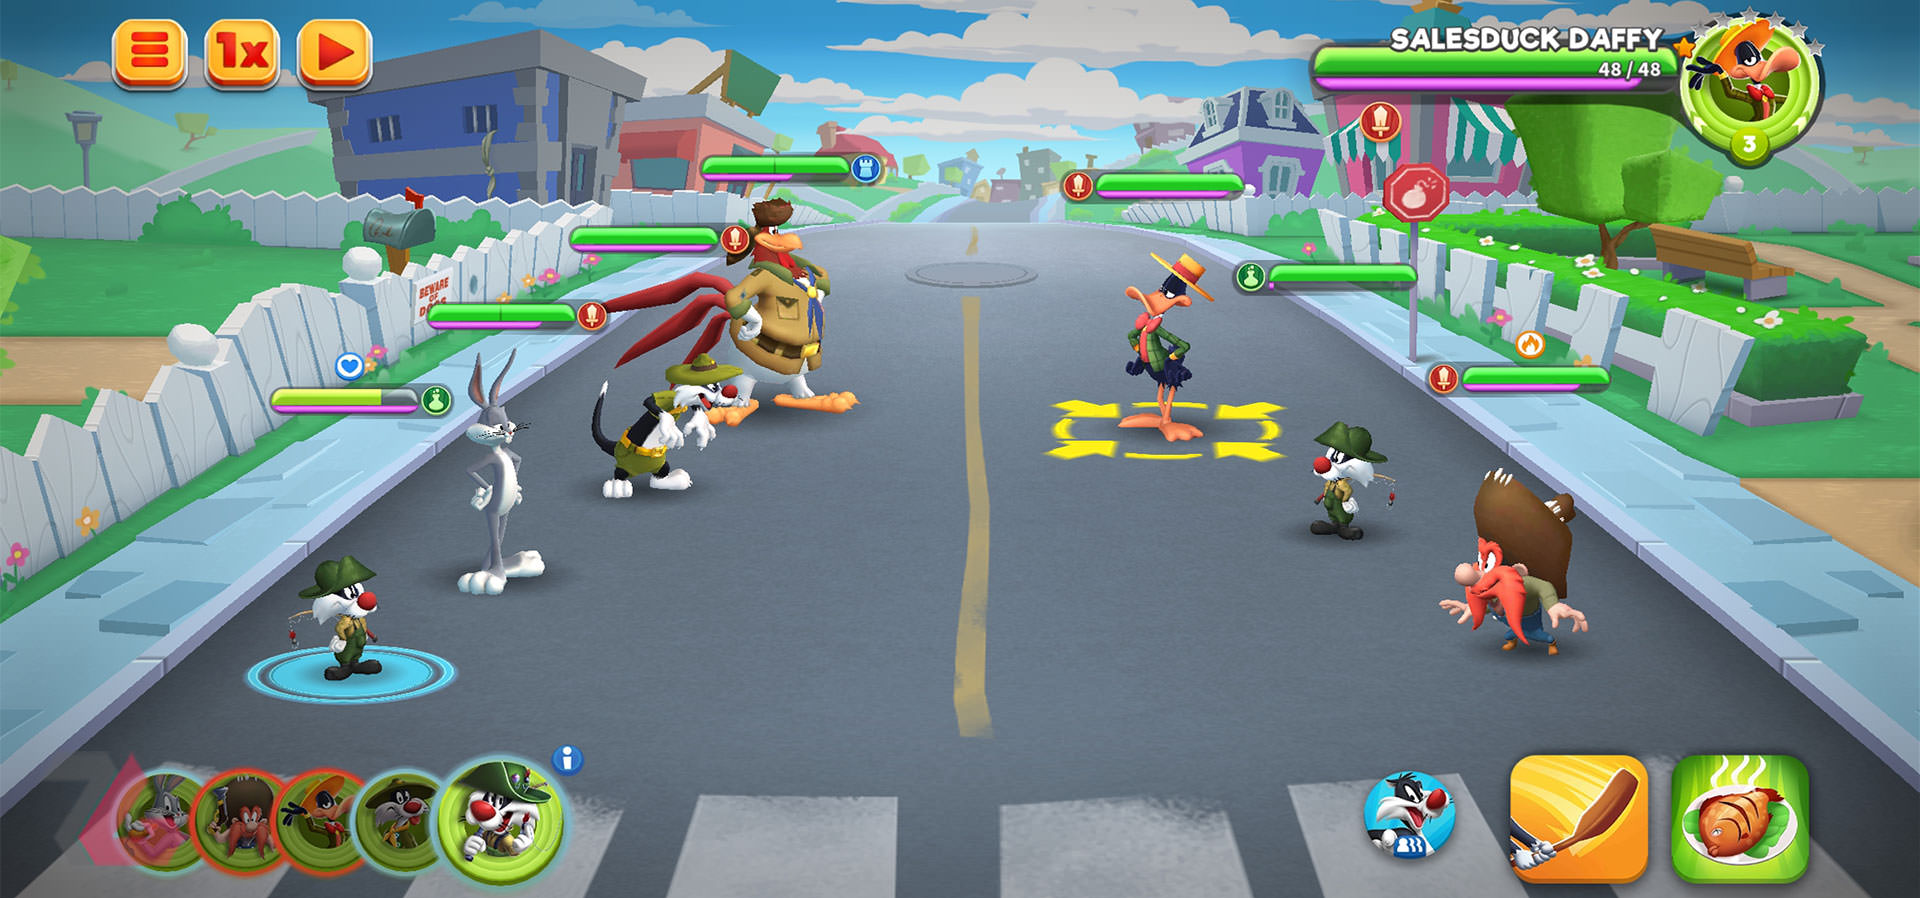 Bugs Bunny Battle with Duffy Duck in Looney Tunes